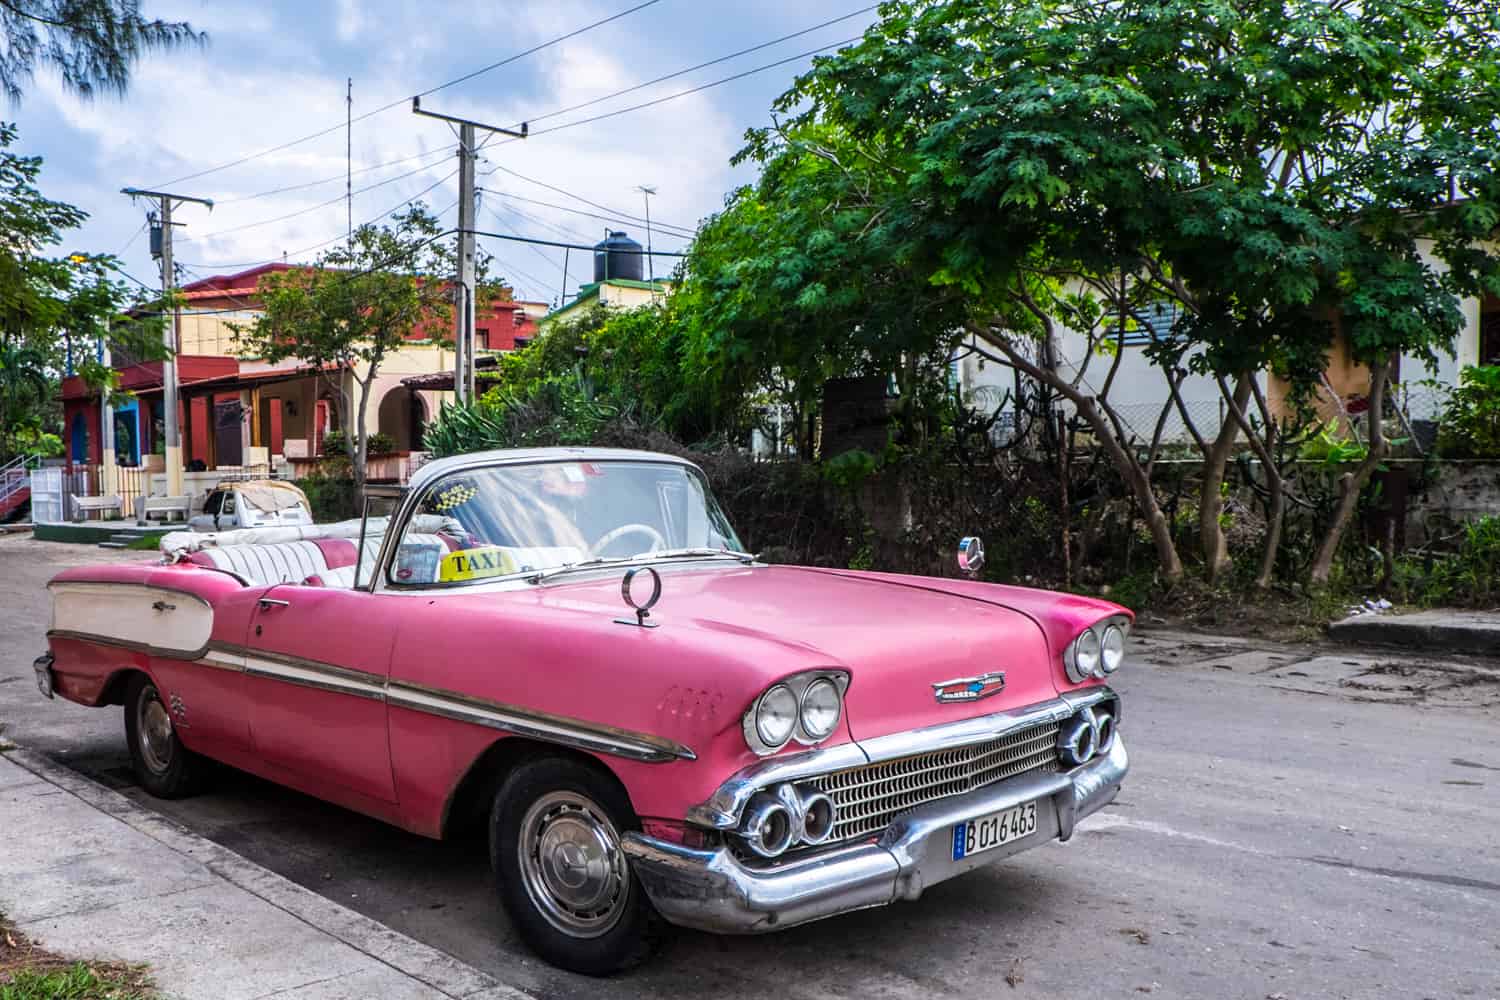 A pink classic Cuban car with a yellow taxi sign in the windshield, on a leafy street in Havana. 